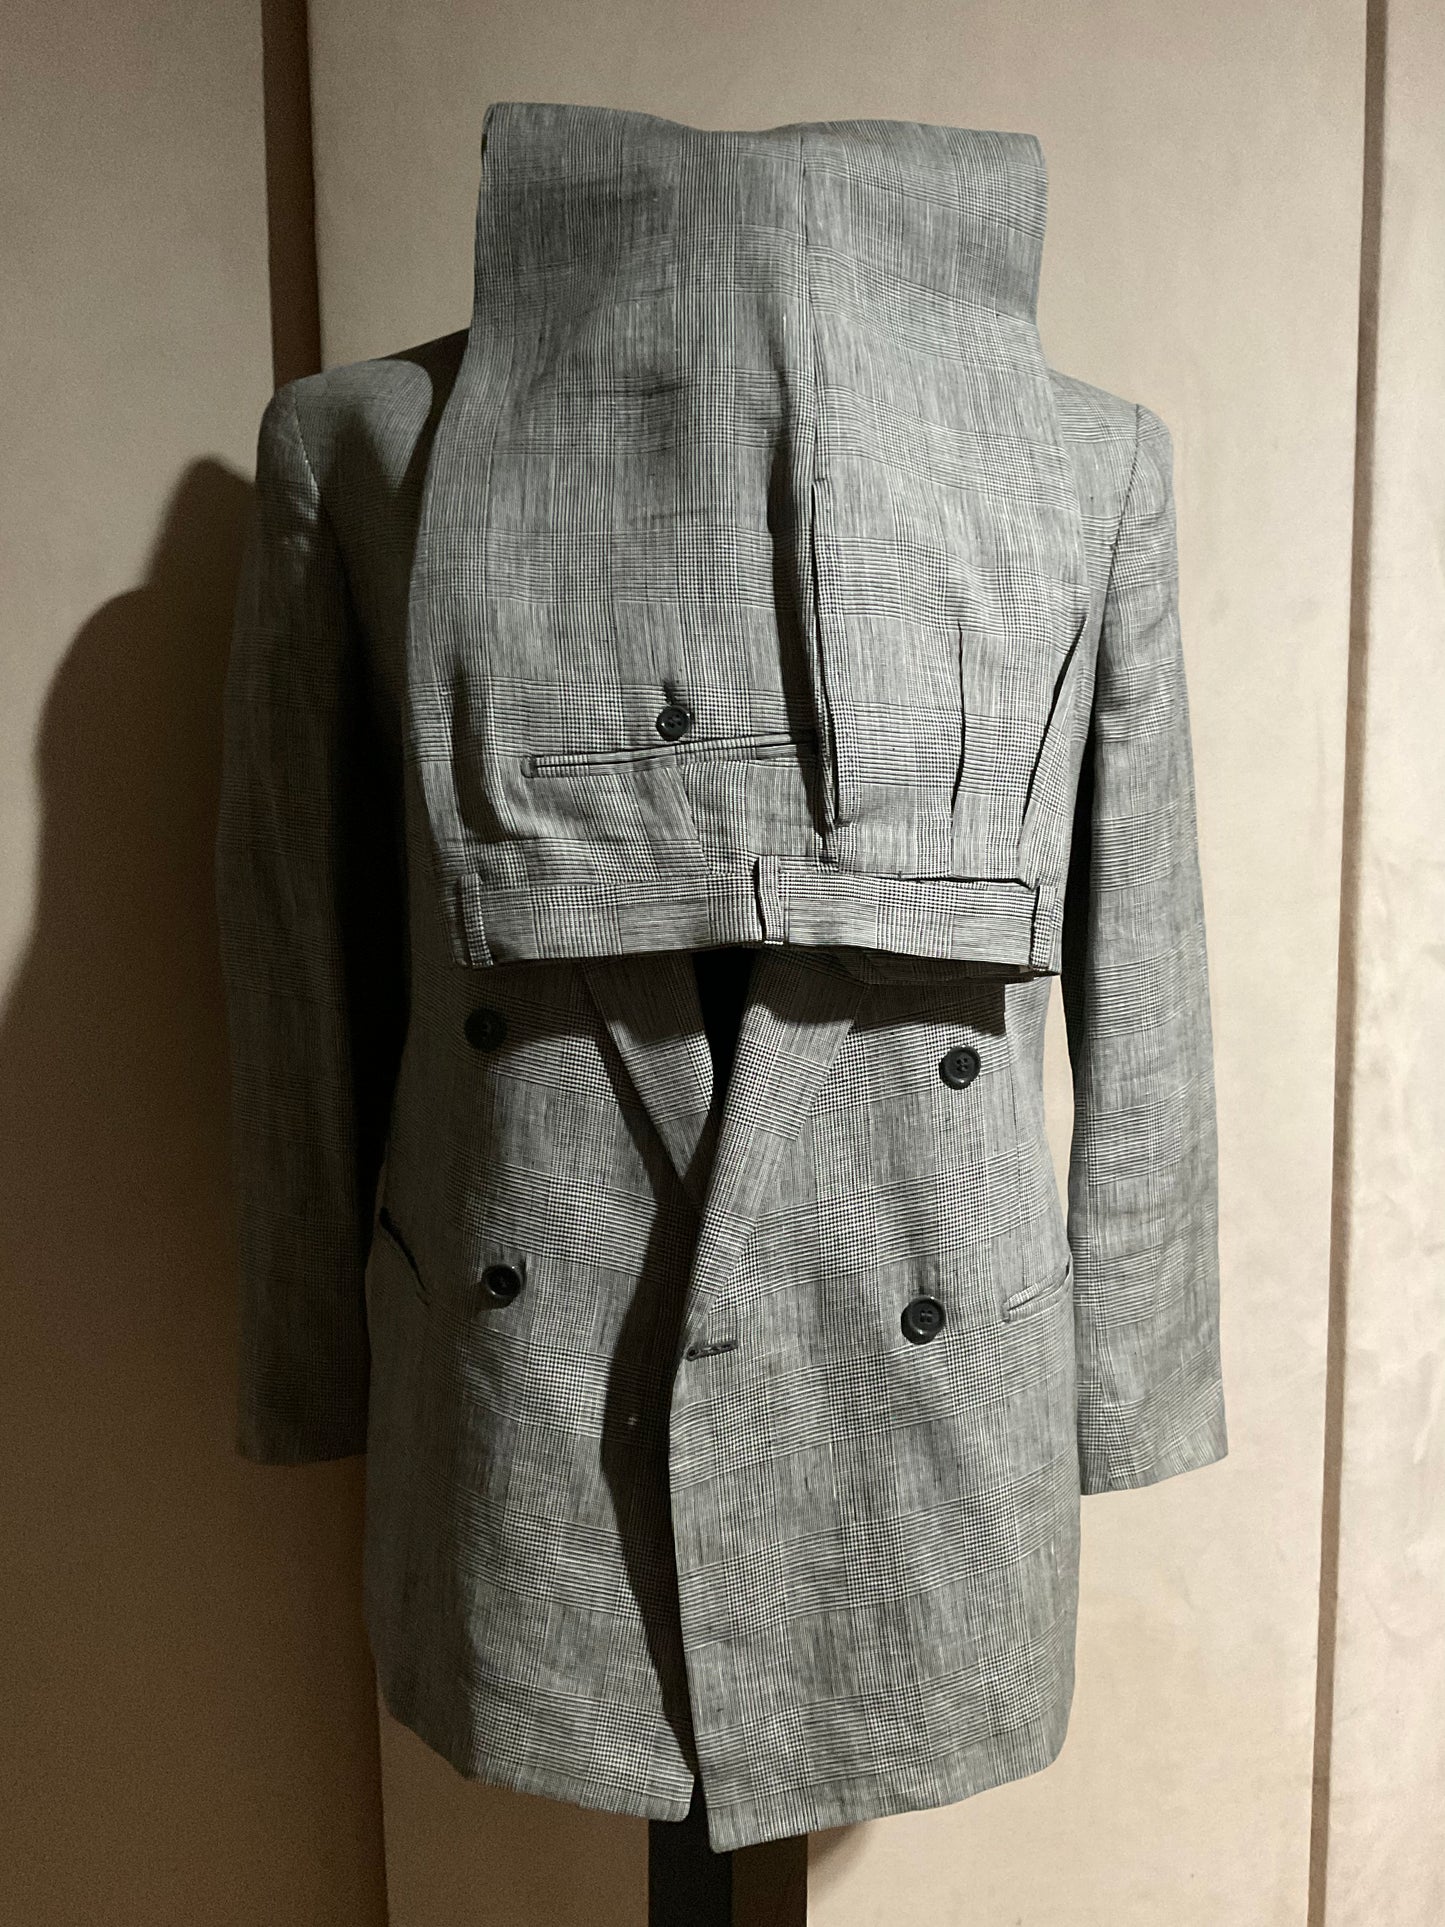 R P SUIT / BLACK & WHITE GLEN PLAID LINEN / DOUBLE BREASTED / 38 REG / MADE IN ITALY